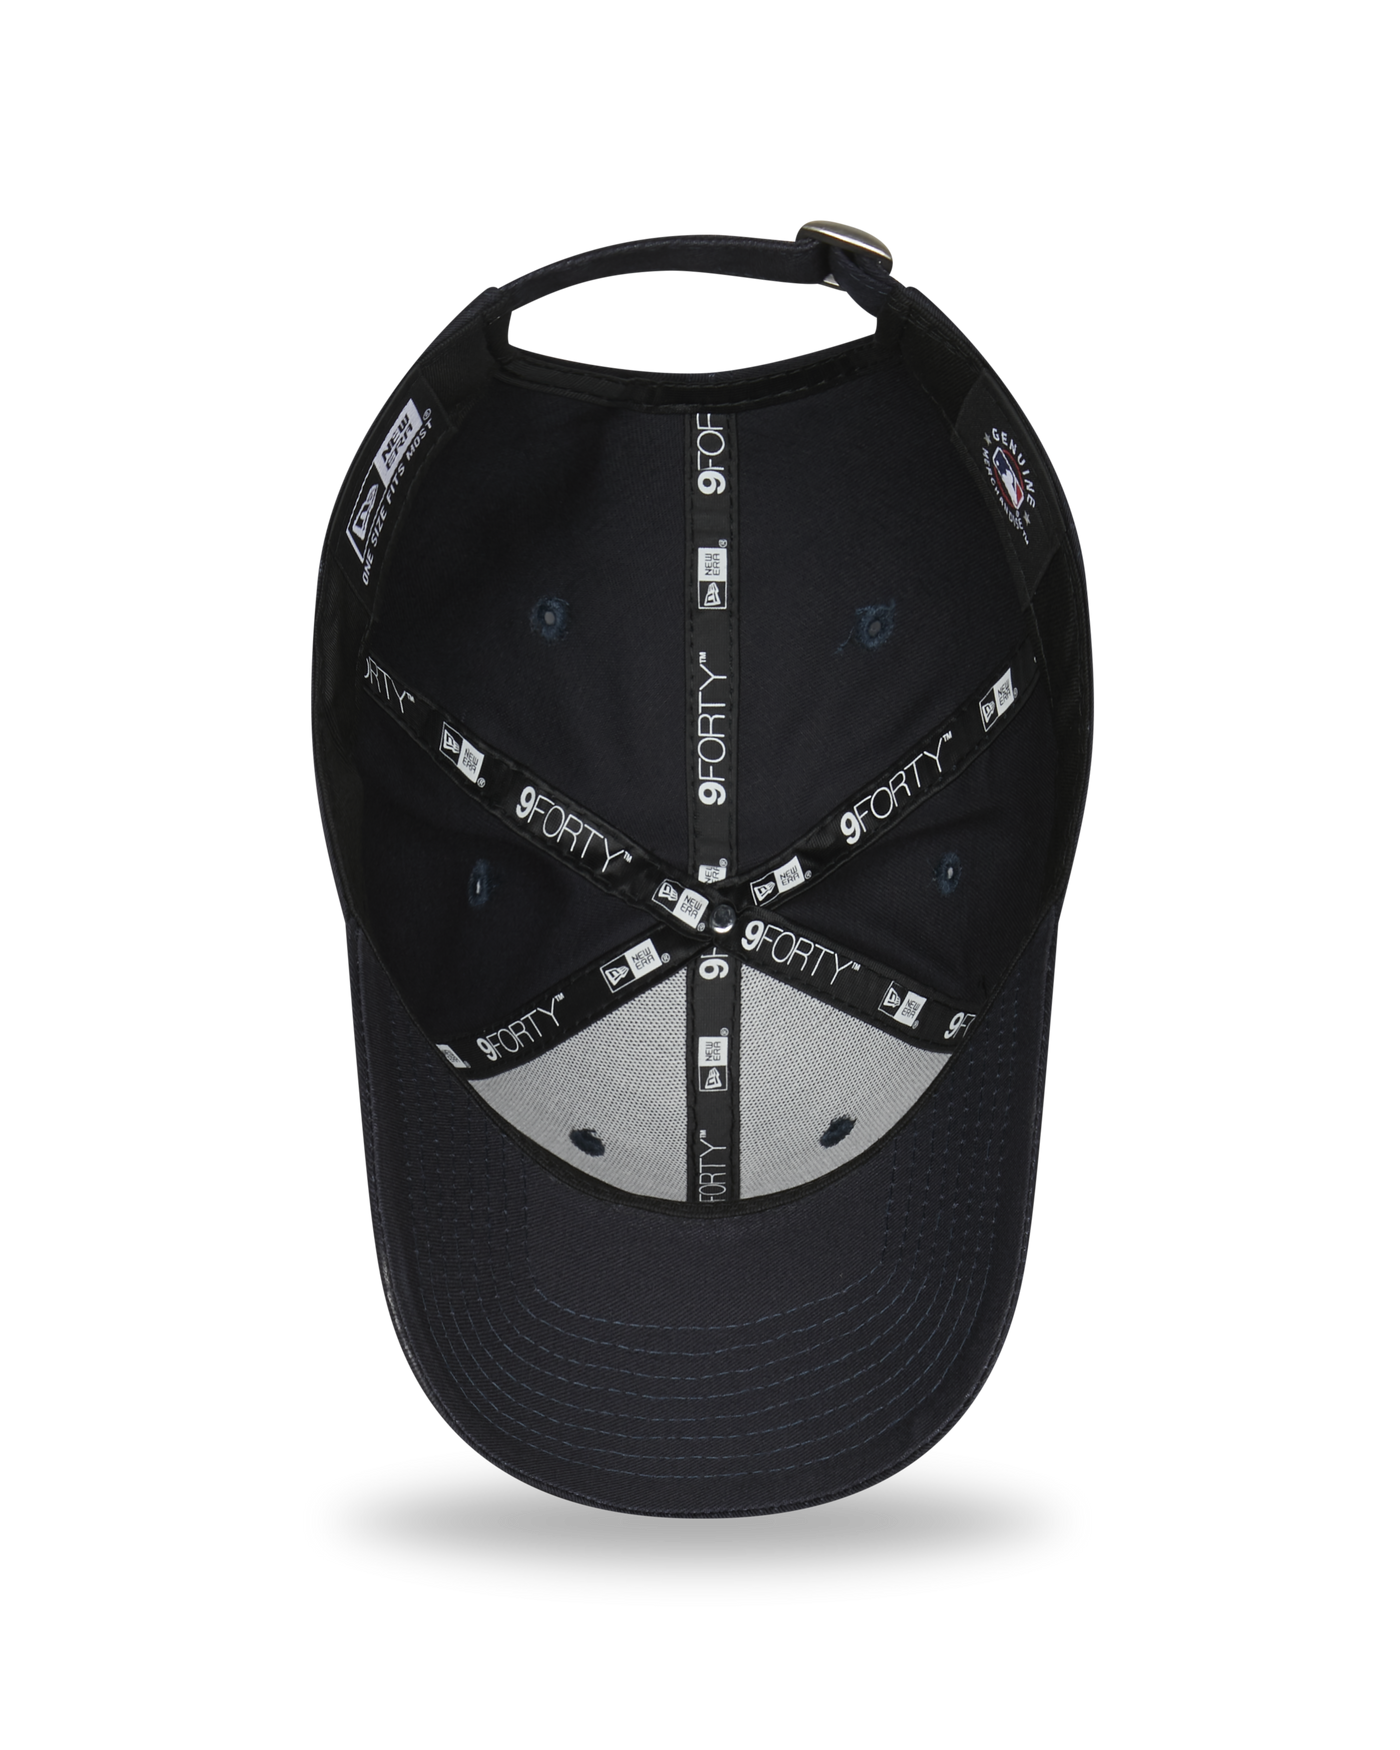 LOS ANGELES DODGERS LEAGUE ESSENTIAL 9FORTY BLACK 9FORTY CAP